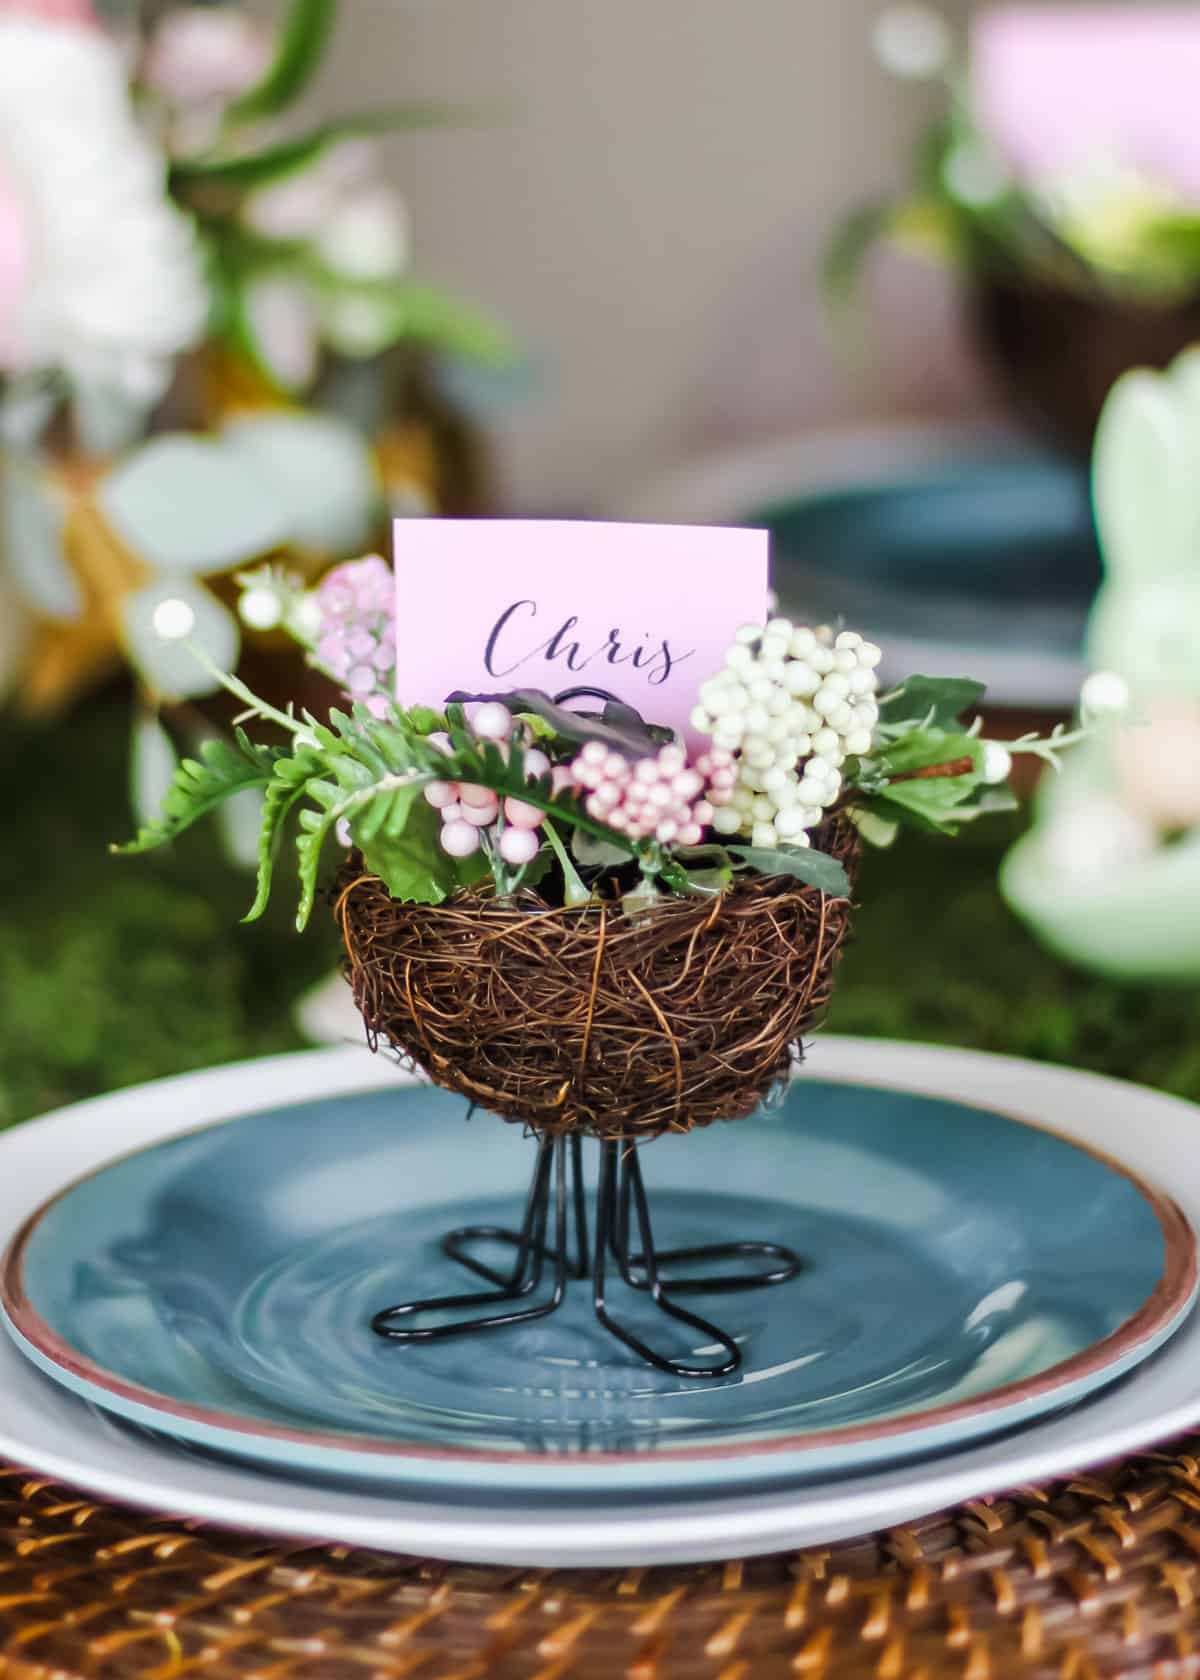 decorative birds nest on top of plate to be a place card holder for Easter.